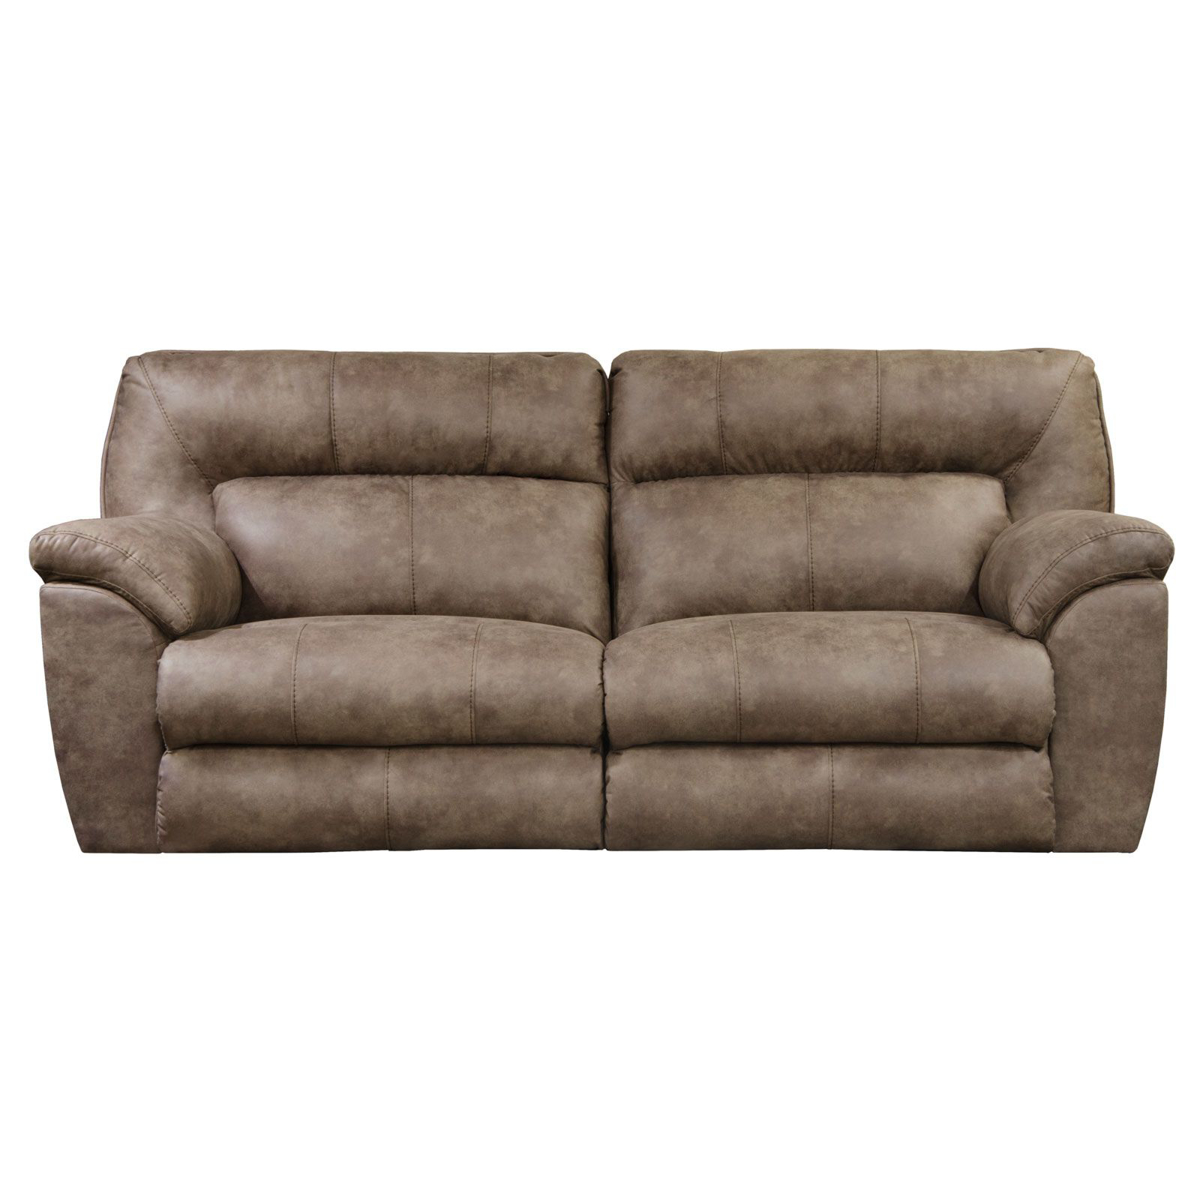 Picture of Hollins Power Recliner Sofa